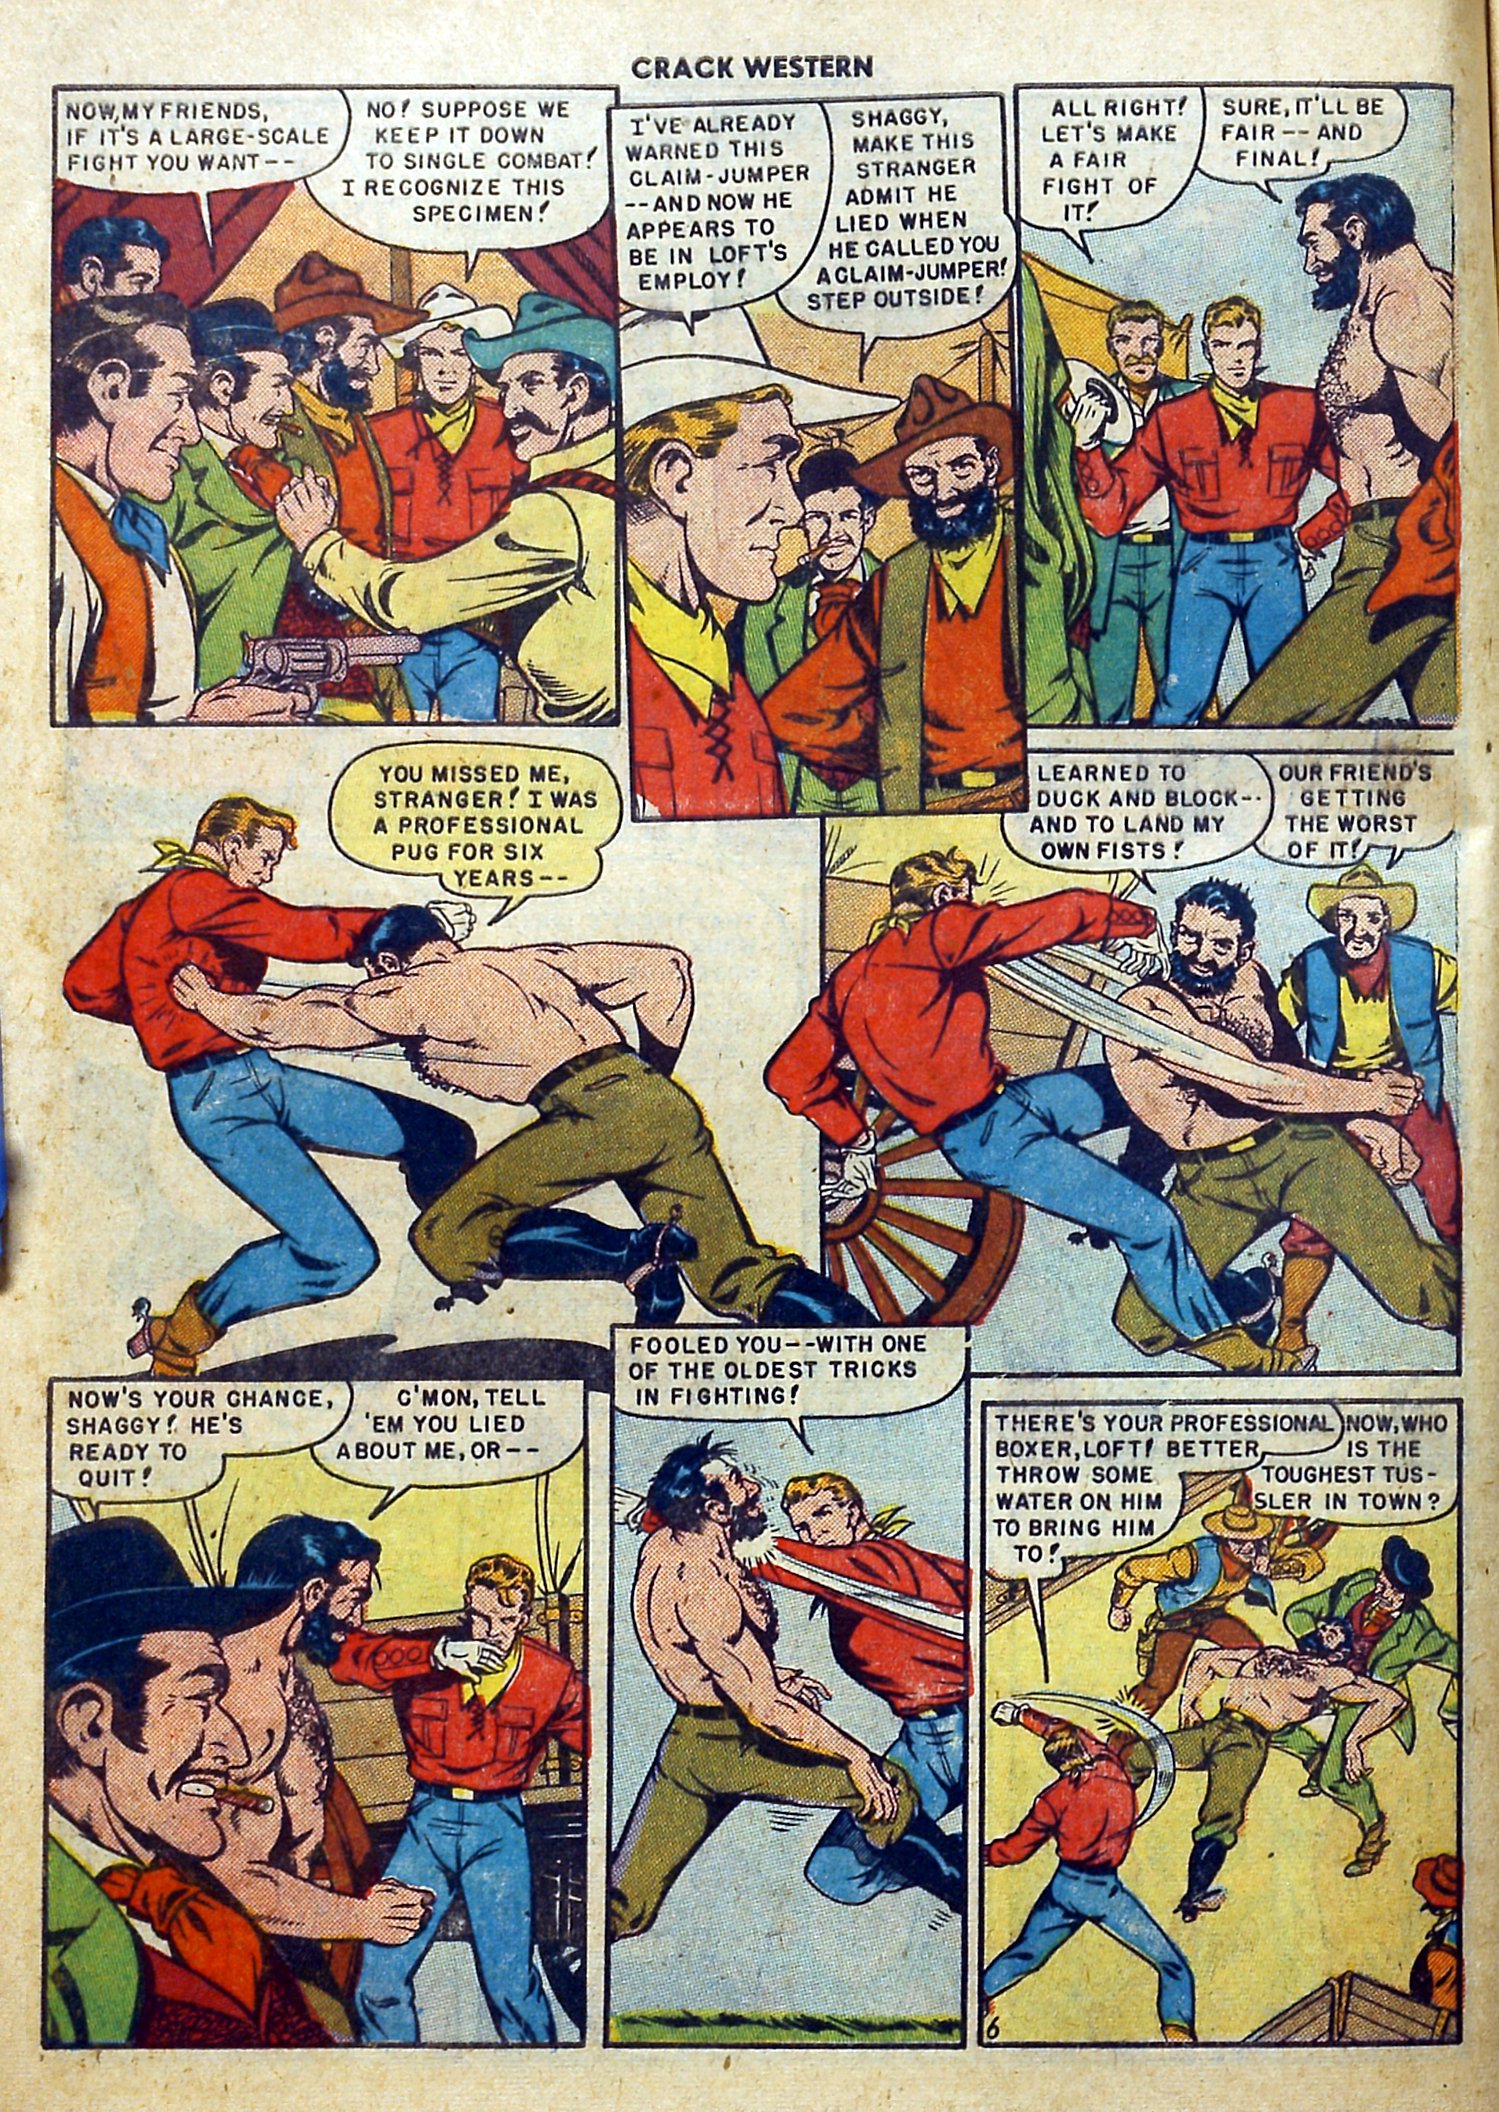 Read online Crack Western comic -  Issue #65 - 8